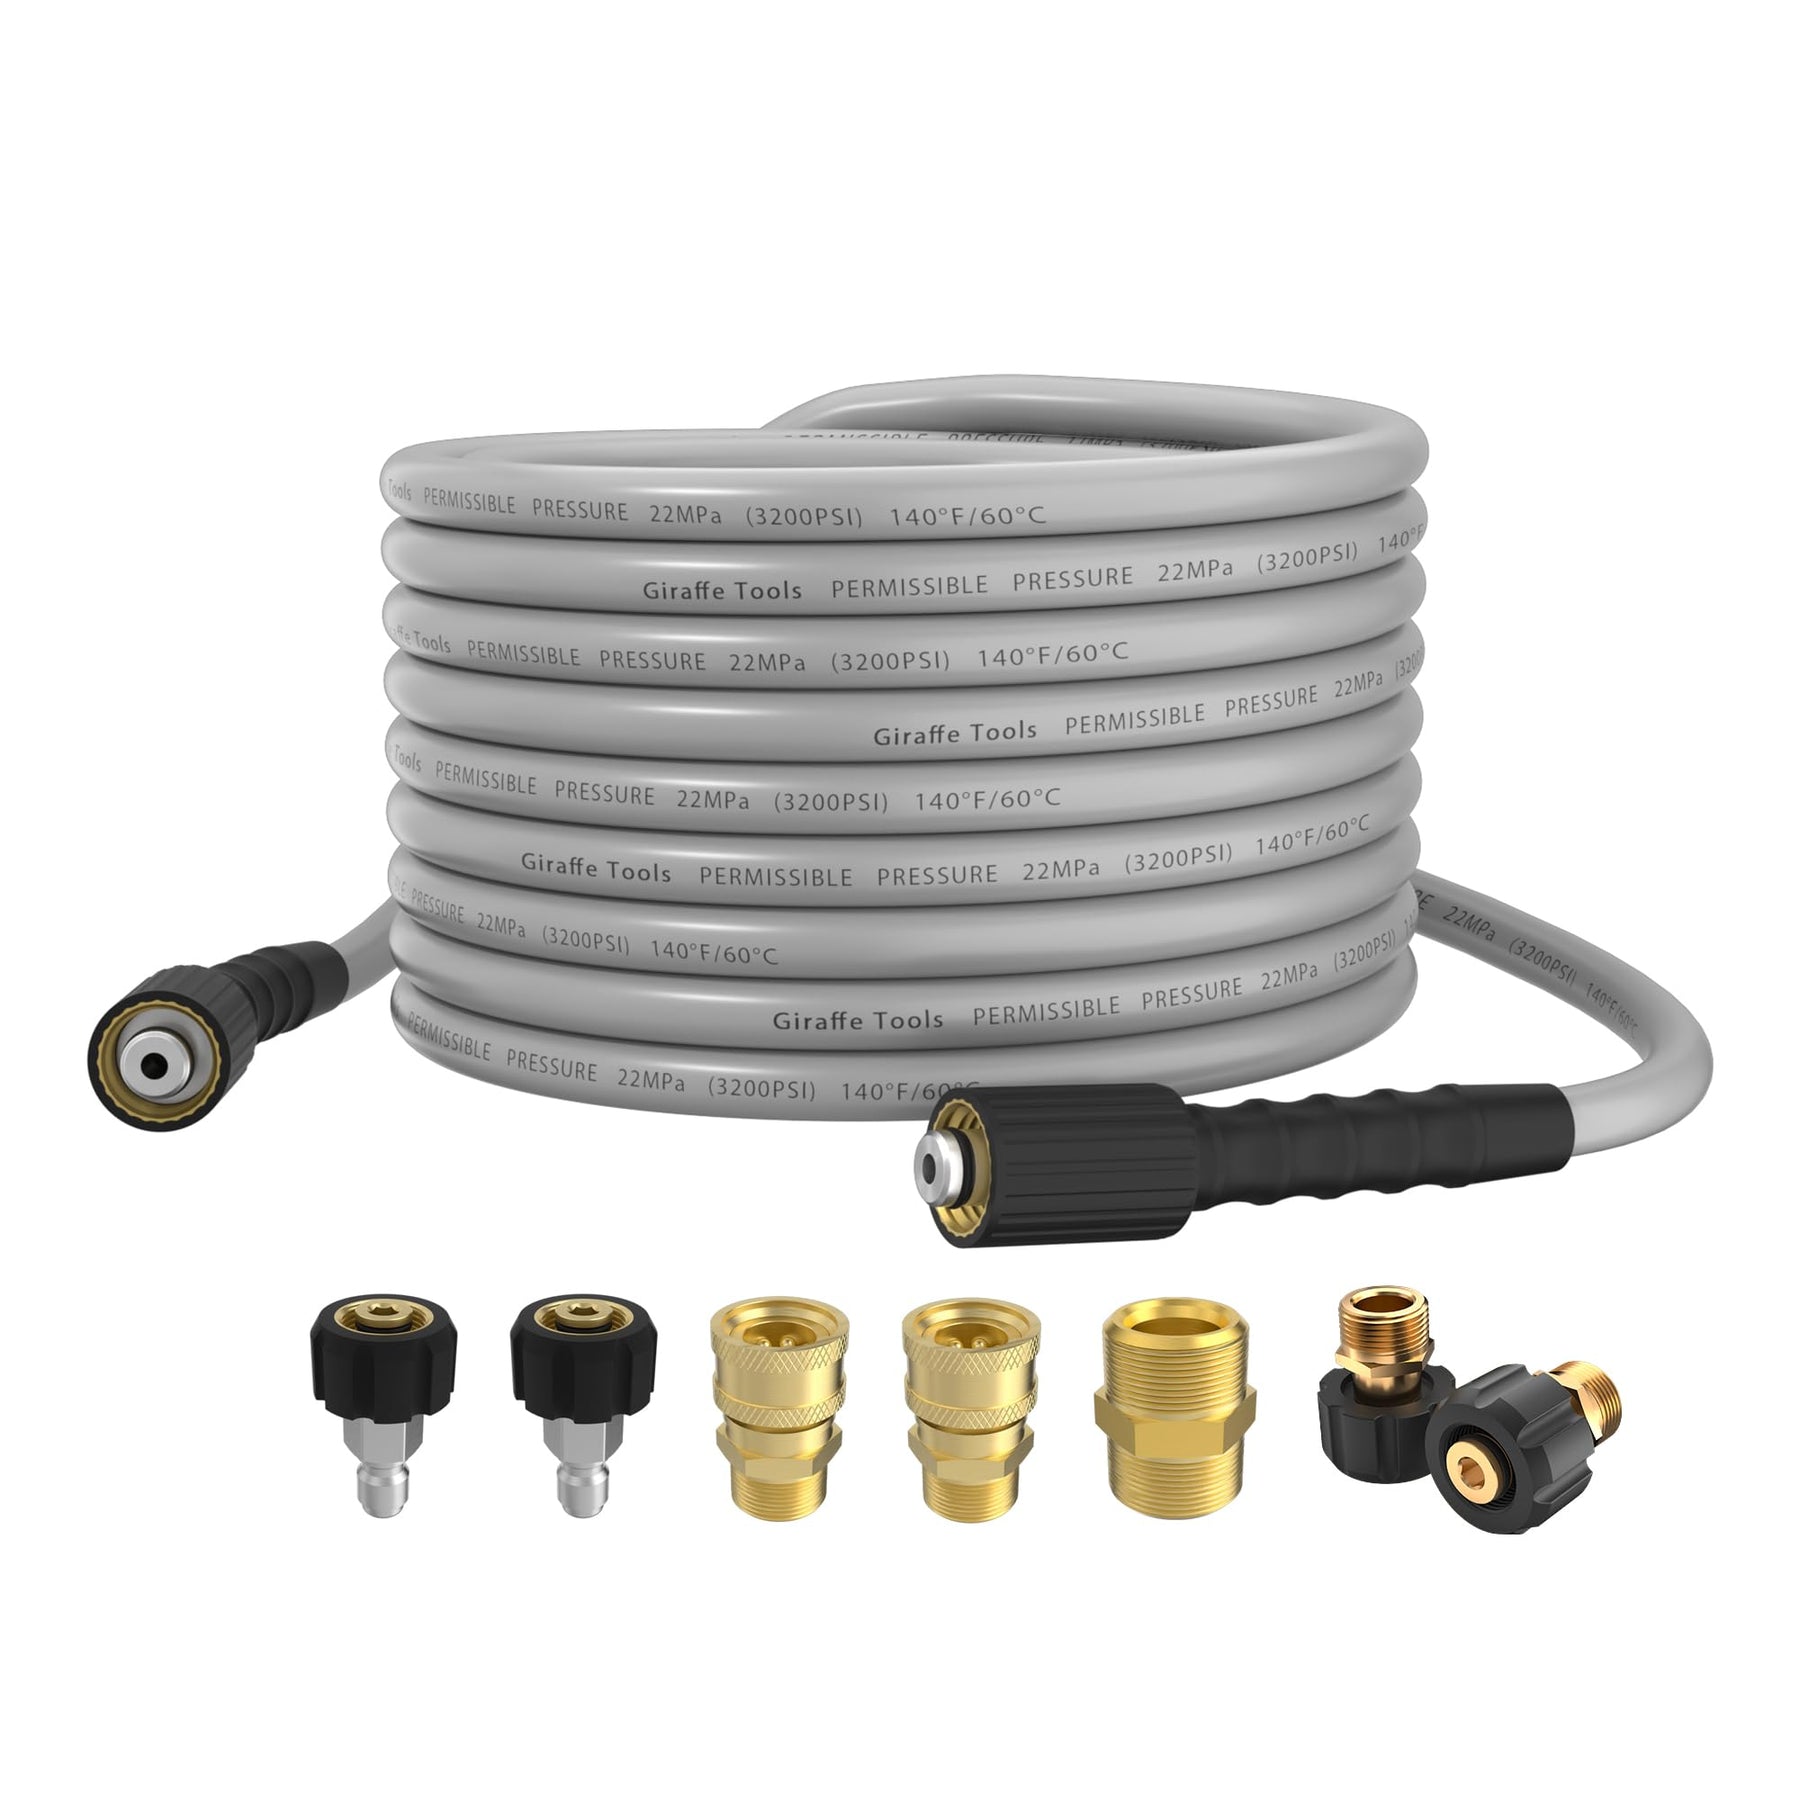 25ft Coiled Air Compressor Hose with Brass Fittings UK